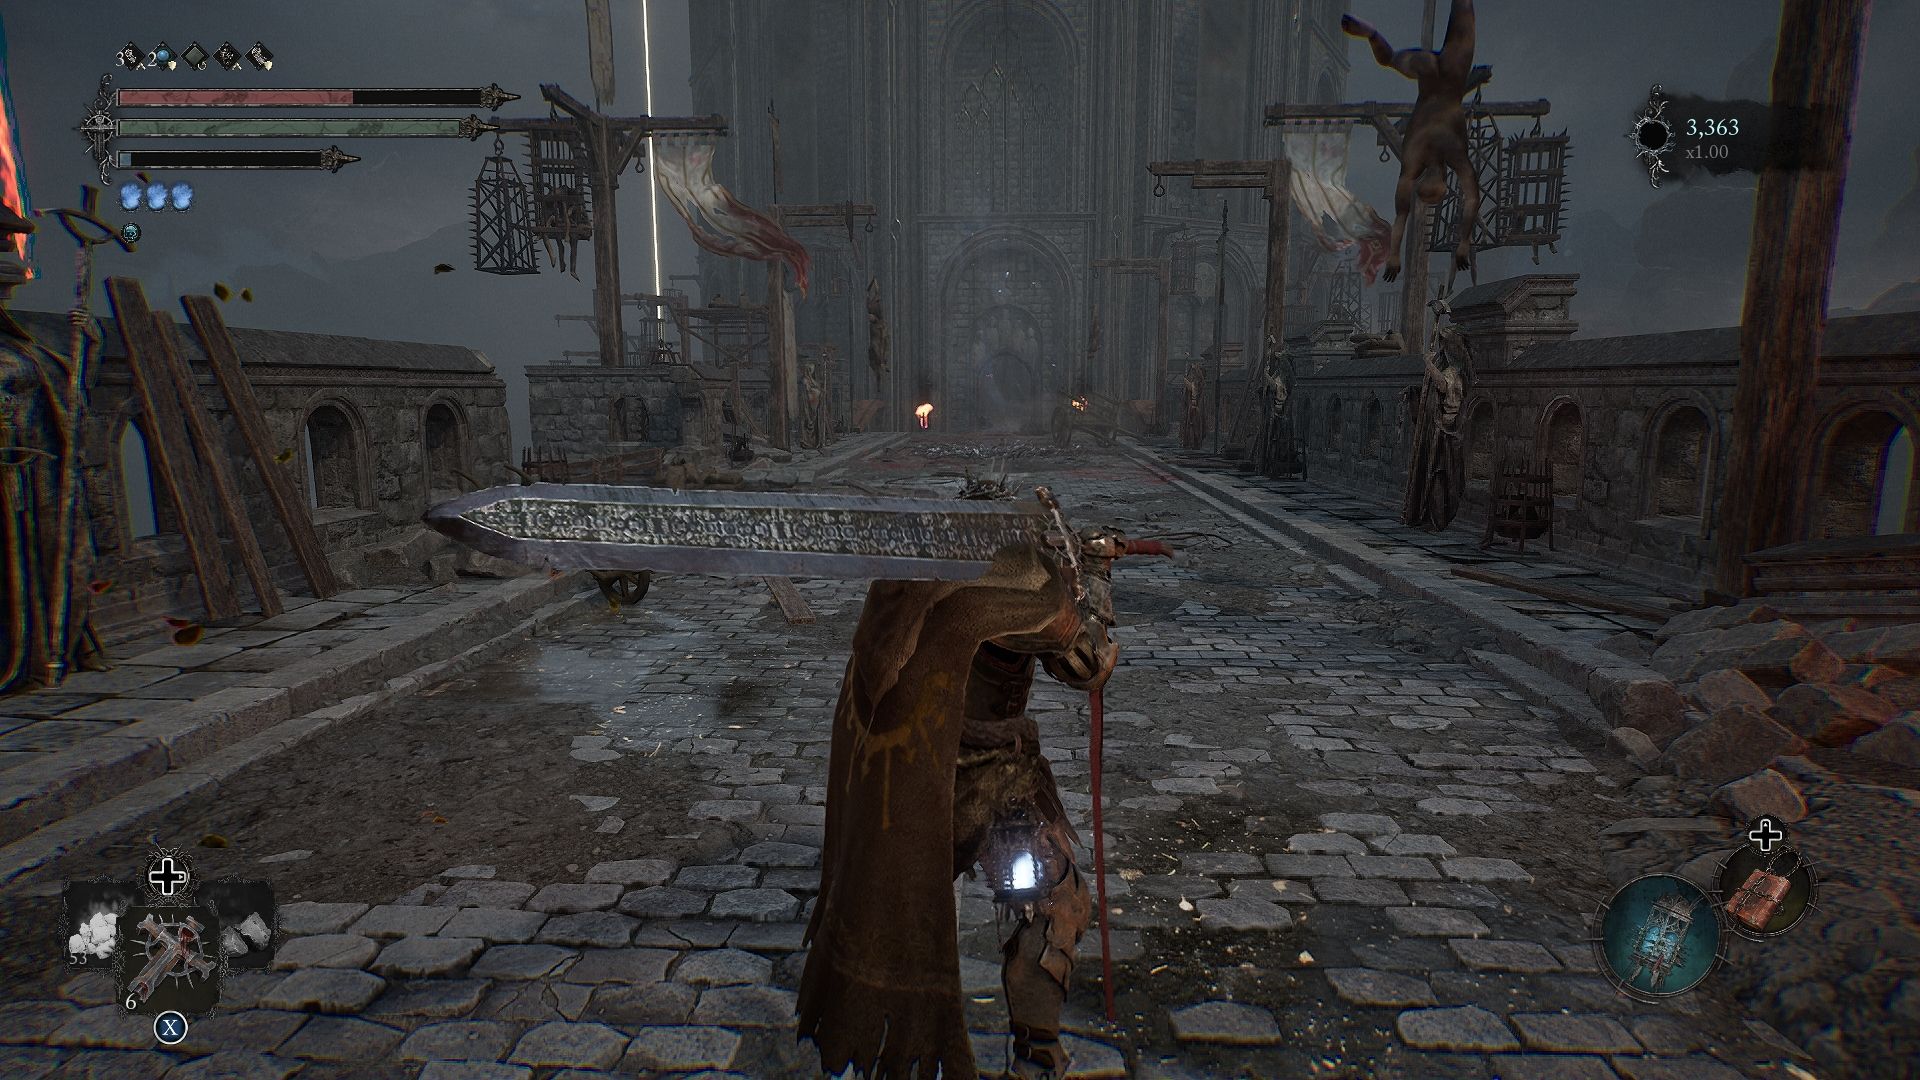 Player standing on the bridge that leads to the Tower of Penance, which is in front of him. Lords of the Fallen